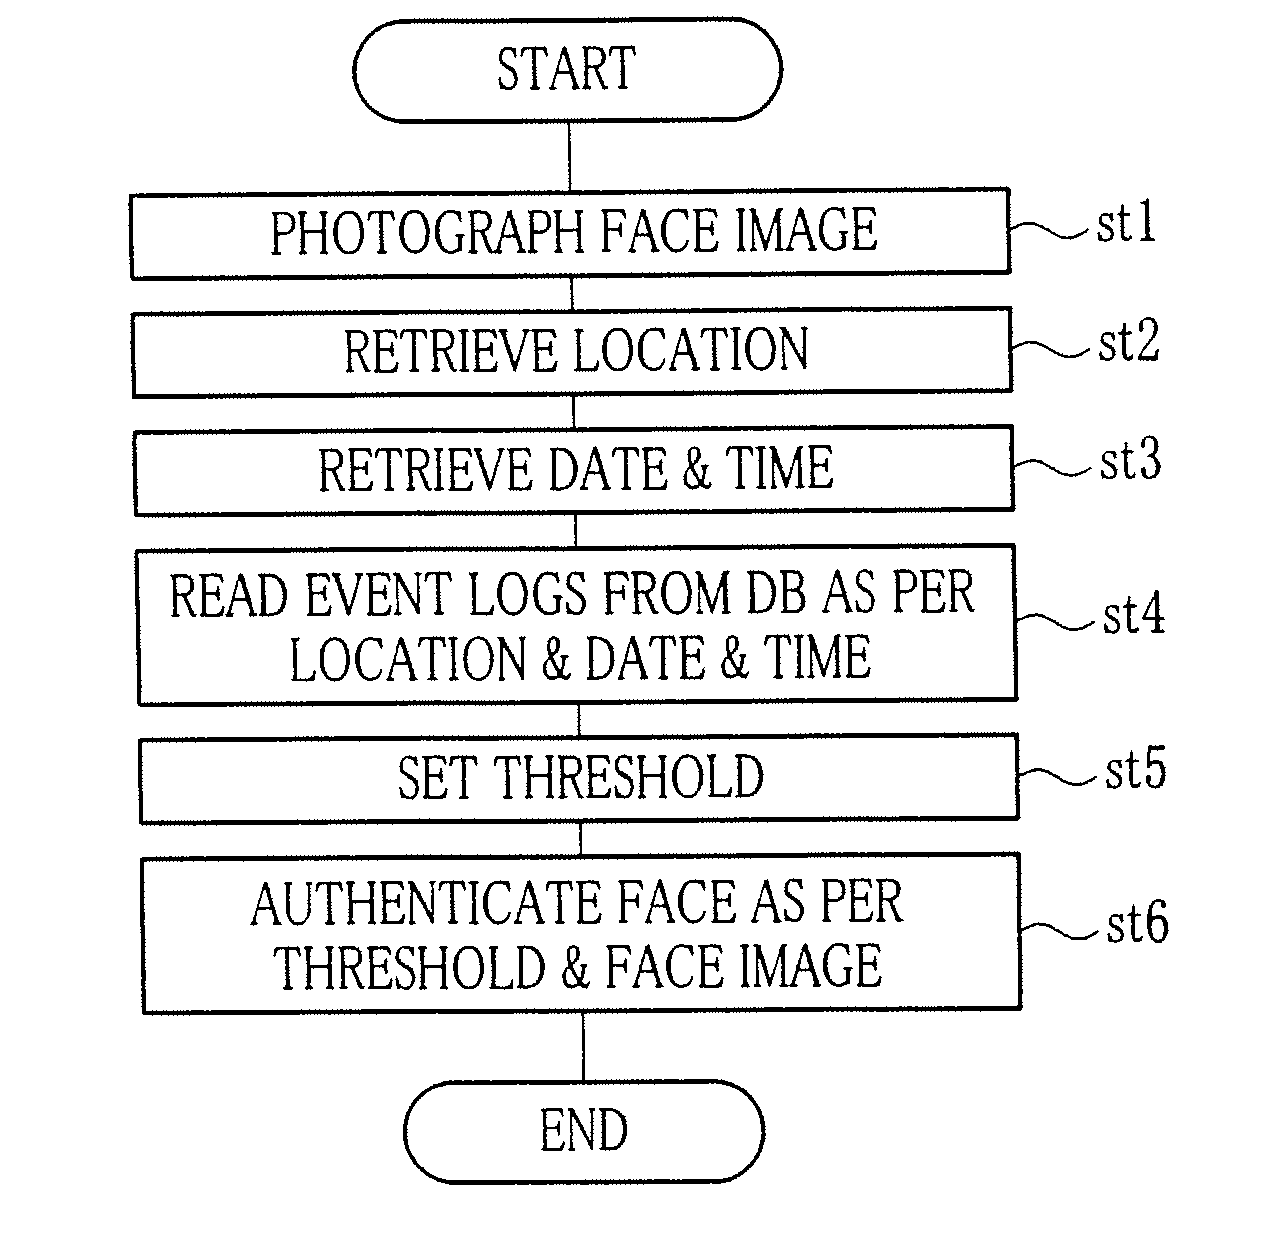 Authenticator and authentication method